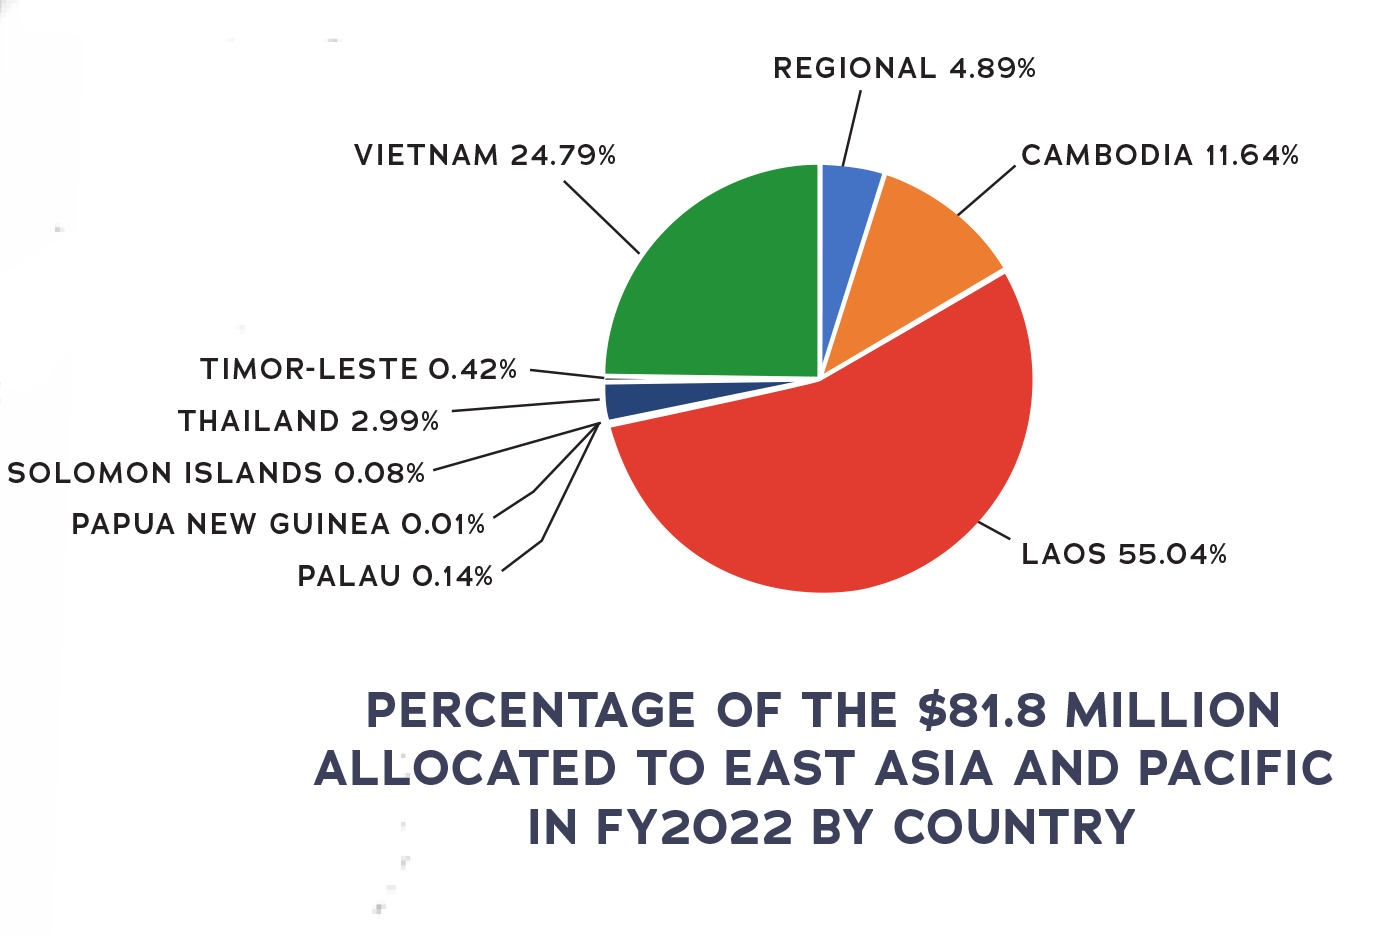 Percentage of the $81.8 Million Allocated to East Asia and Pacific in FY2022 by Country, full text description in Appendix A